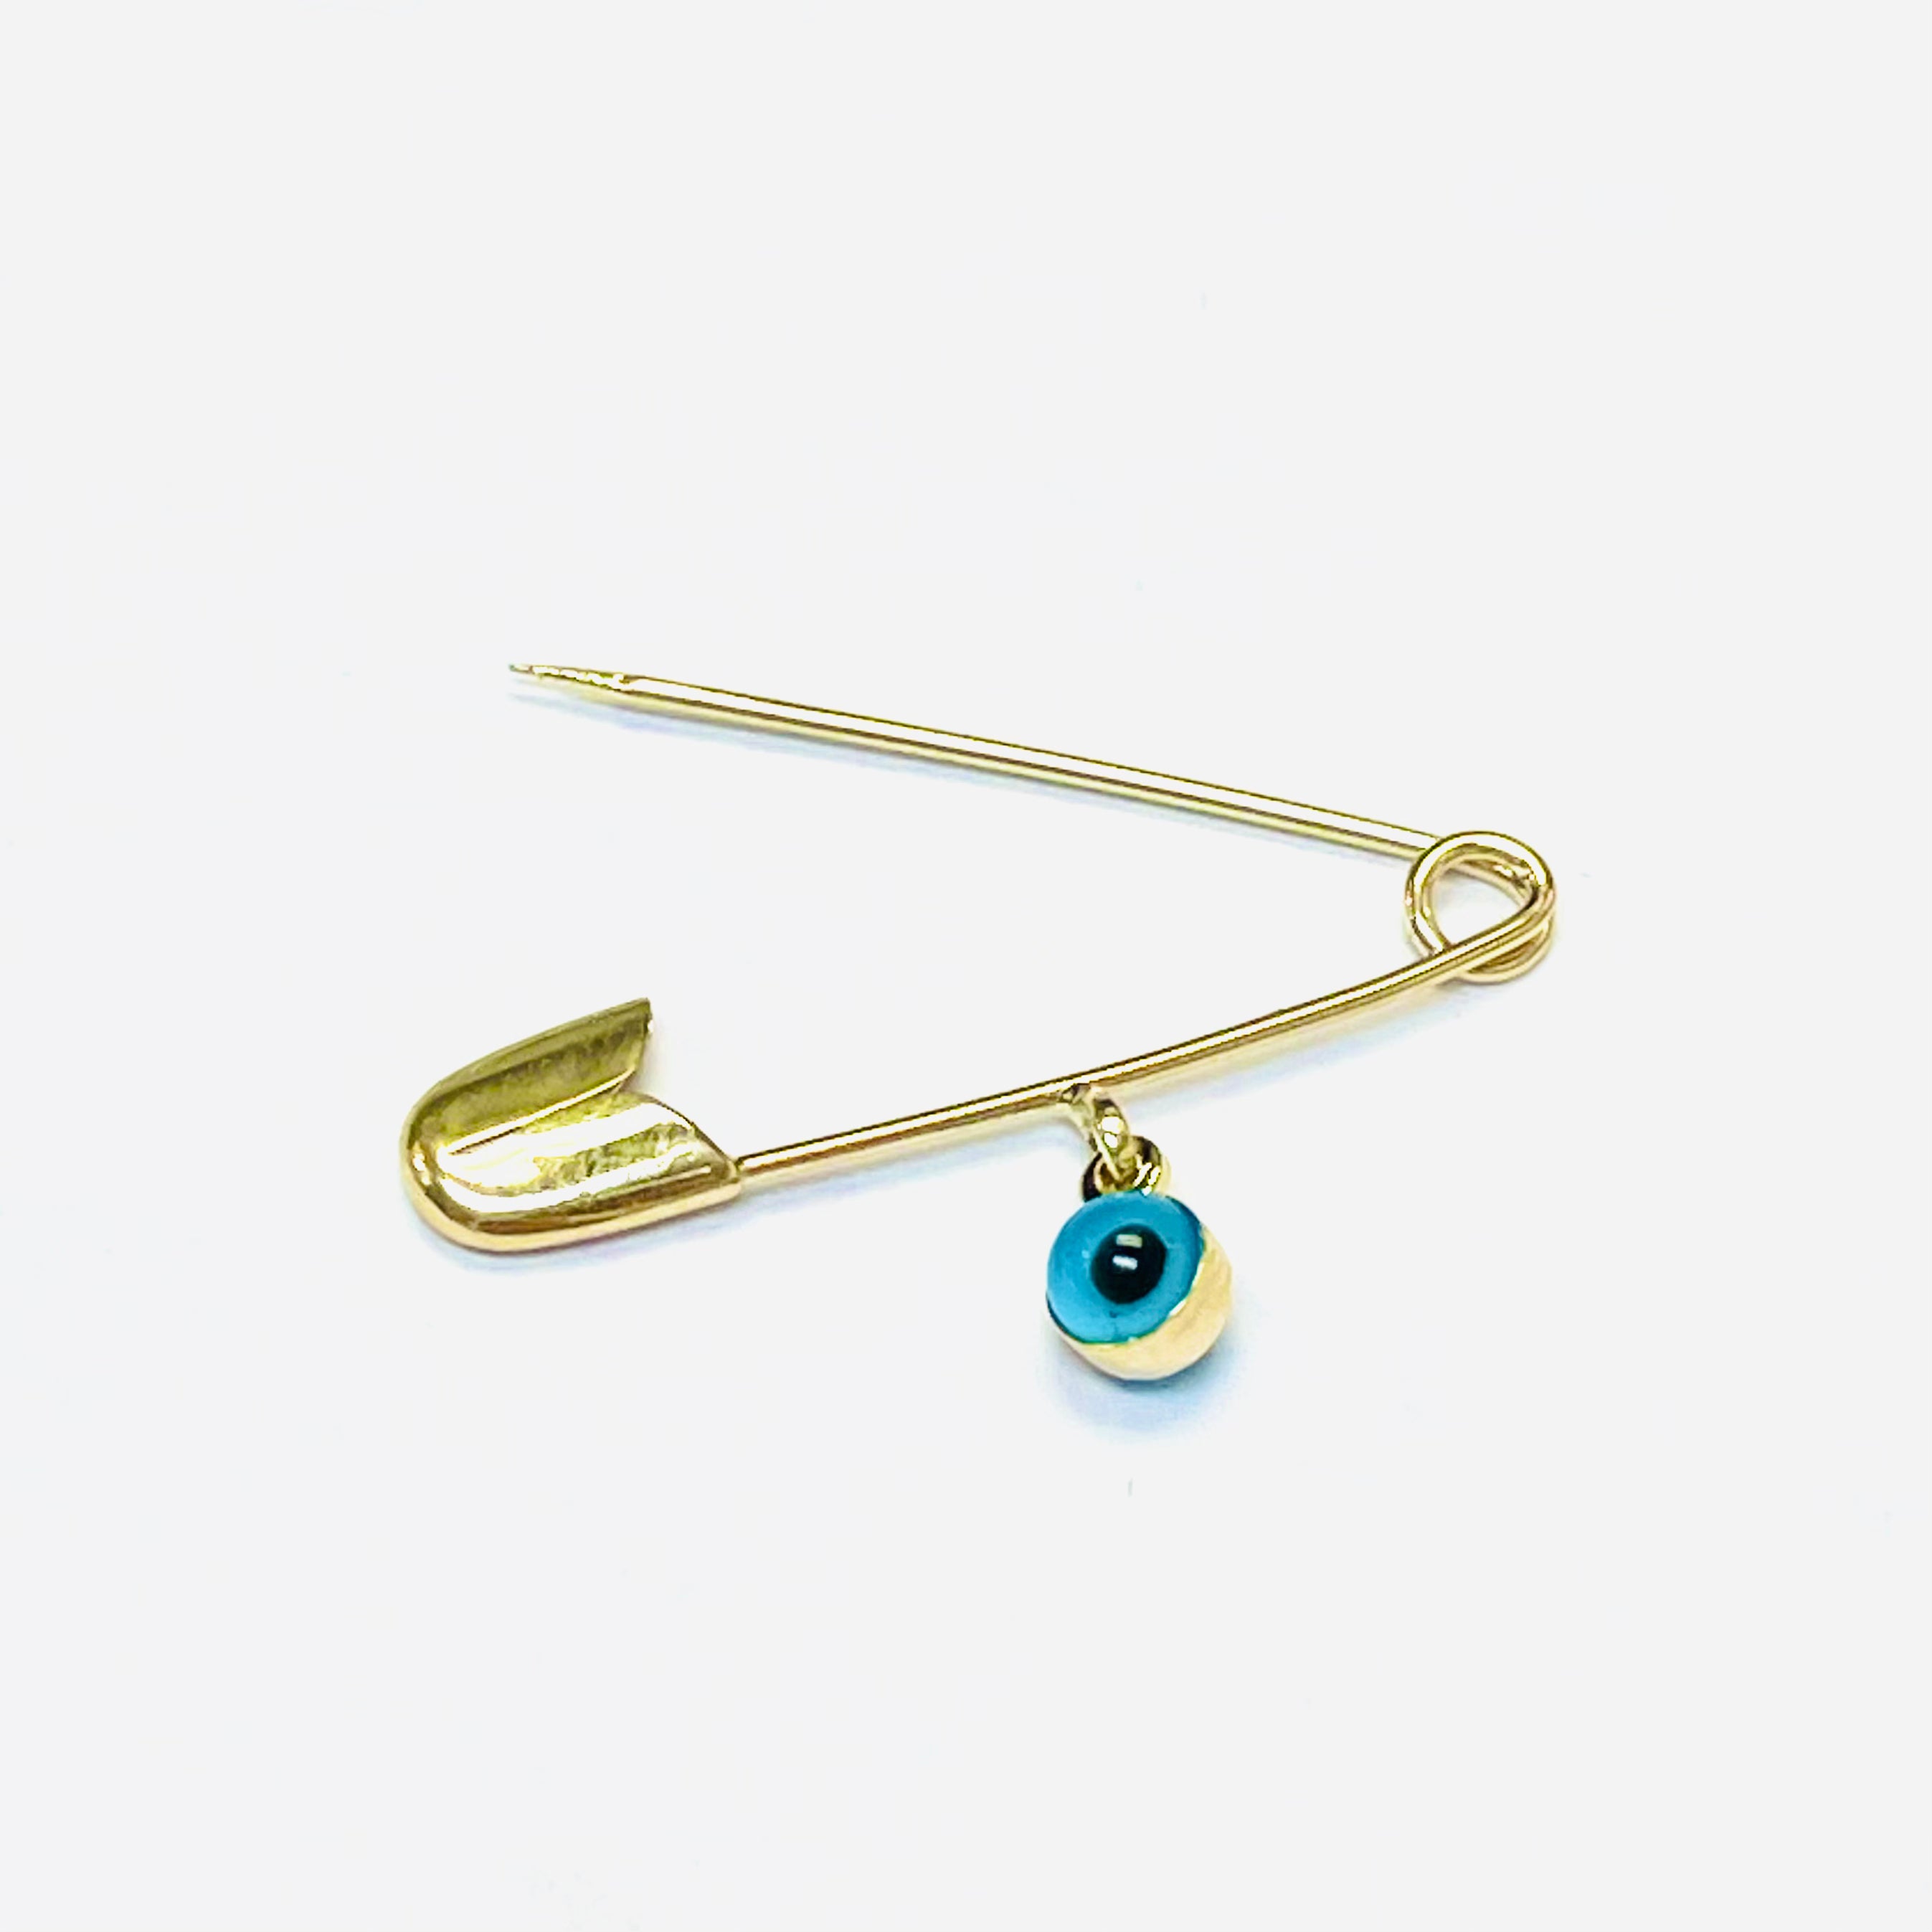 14K Solid Yellow Gold Safety Pin Pendant Charm Holder With Evil Eye 1"